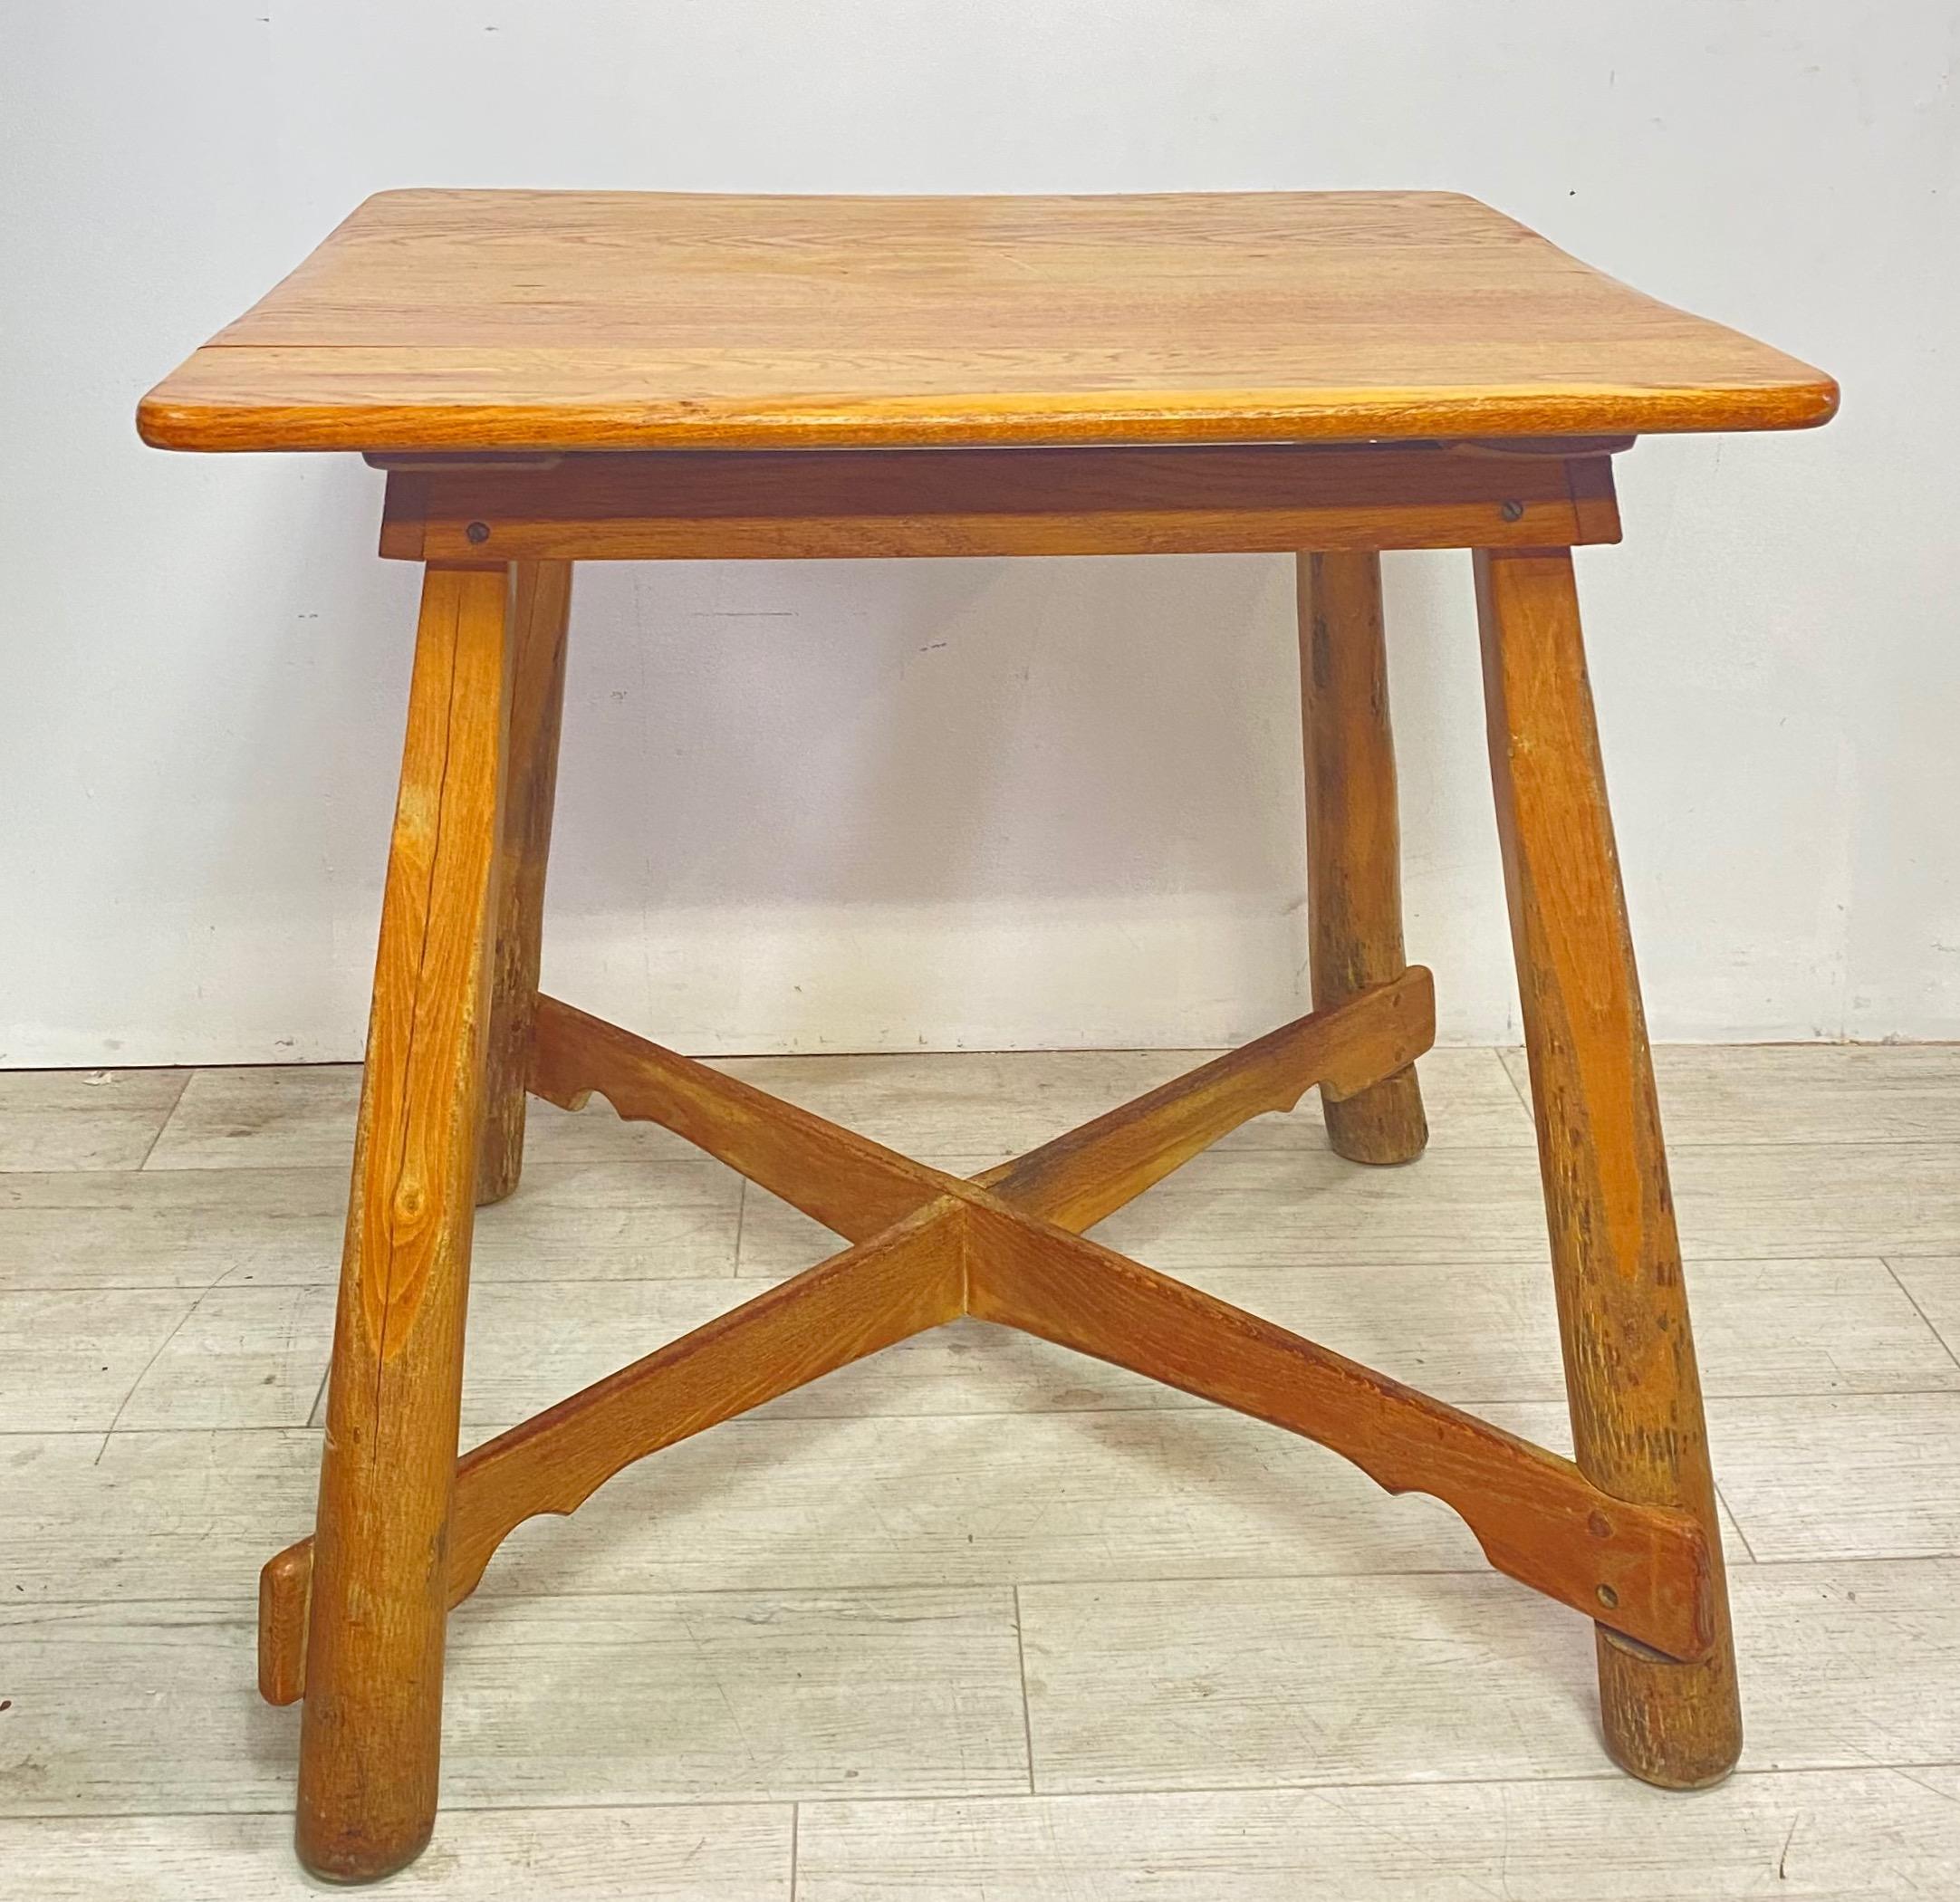 Hand-Crafted Rustic Old Hickory Dinette Set, American Midcentury, circa 1950